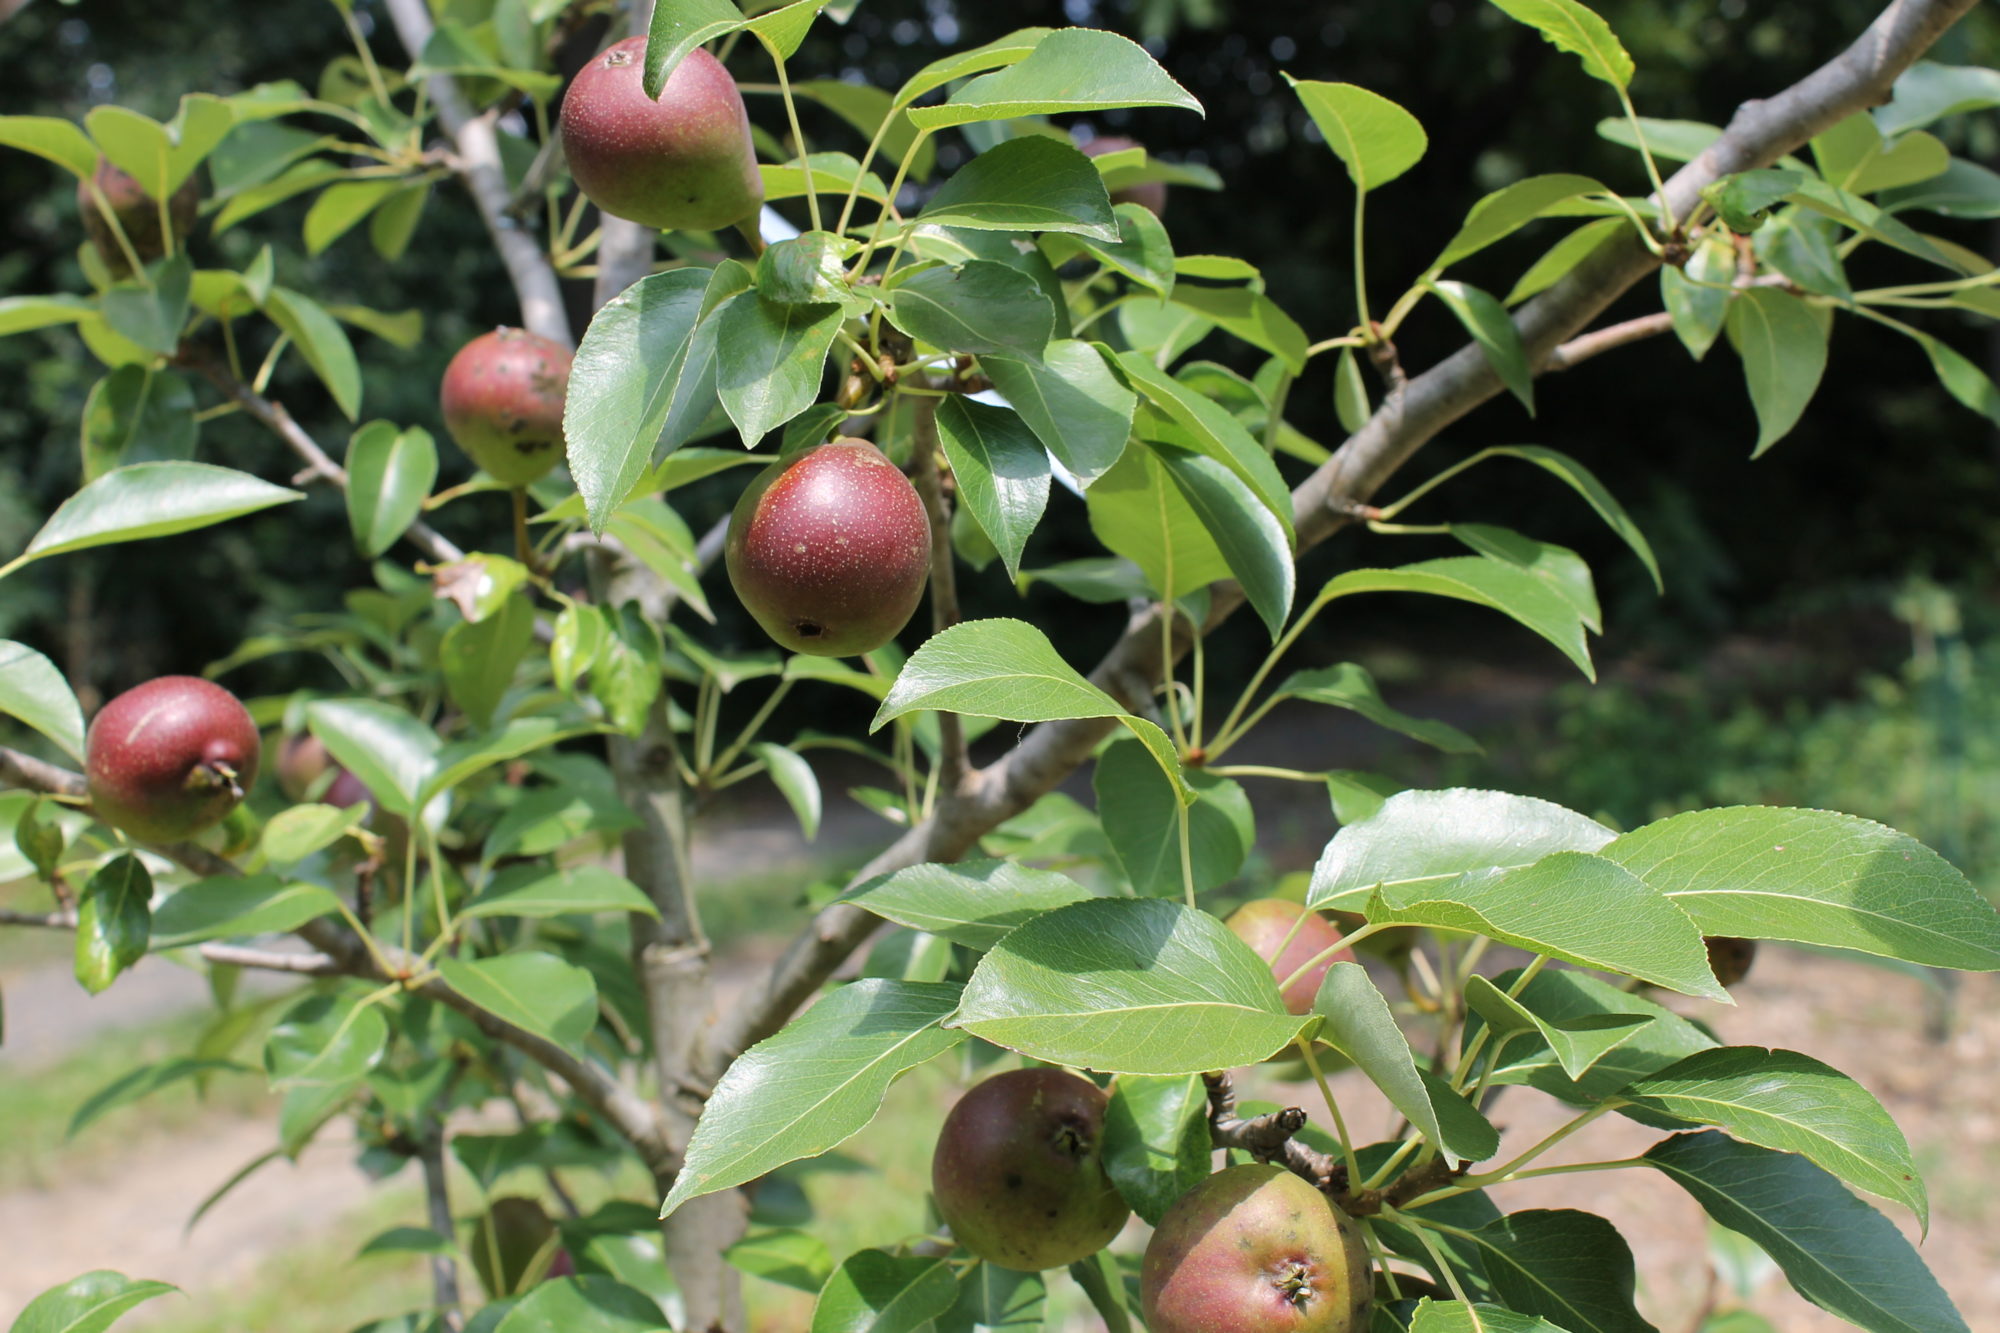 Photo: Seckel pears ripen on a young tree. Caption: POP has replanted Seckel pears in orchards across Philadelphia over the last 15 years.  Seckel has proved a relatively easy variety to grow and unlike other European pears, it ripens on the tree, making it easier to harvest!  